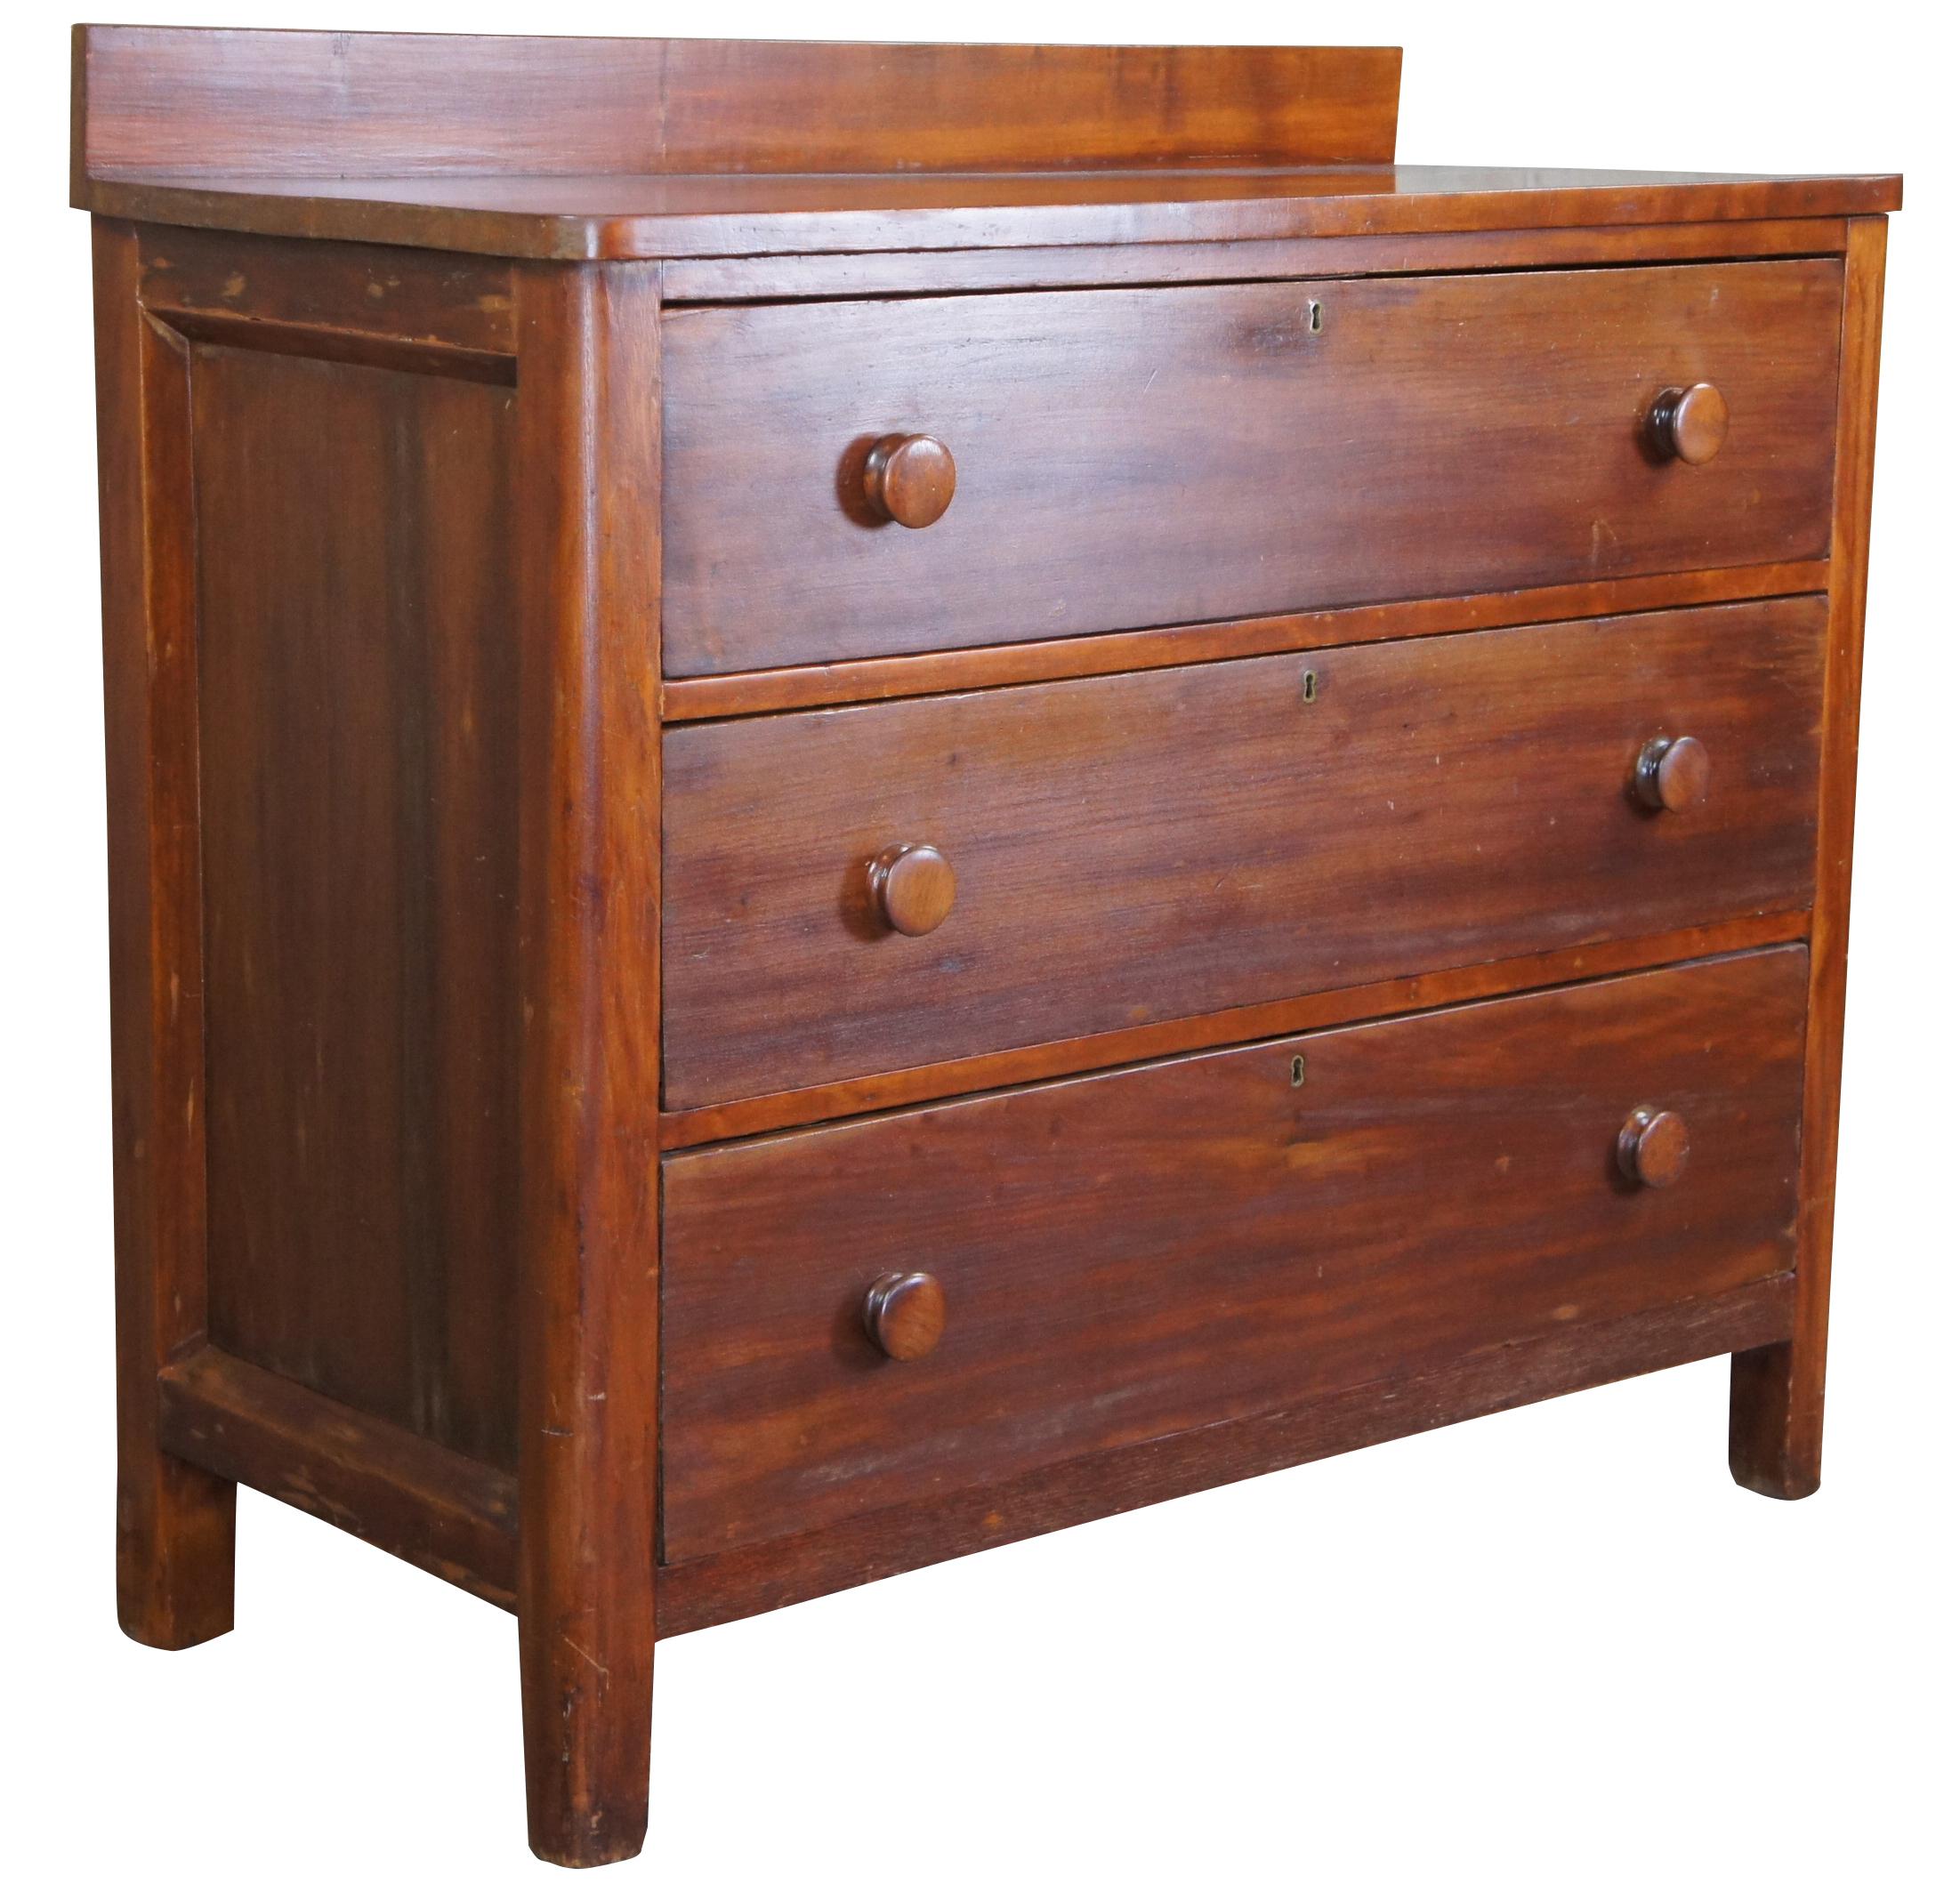 Civil War era chest of drawers. Made of cherry featuring three hand dovetailed drawers with turned knobs, paneled sides, and backsplash.

Measures: 20.5